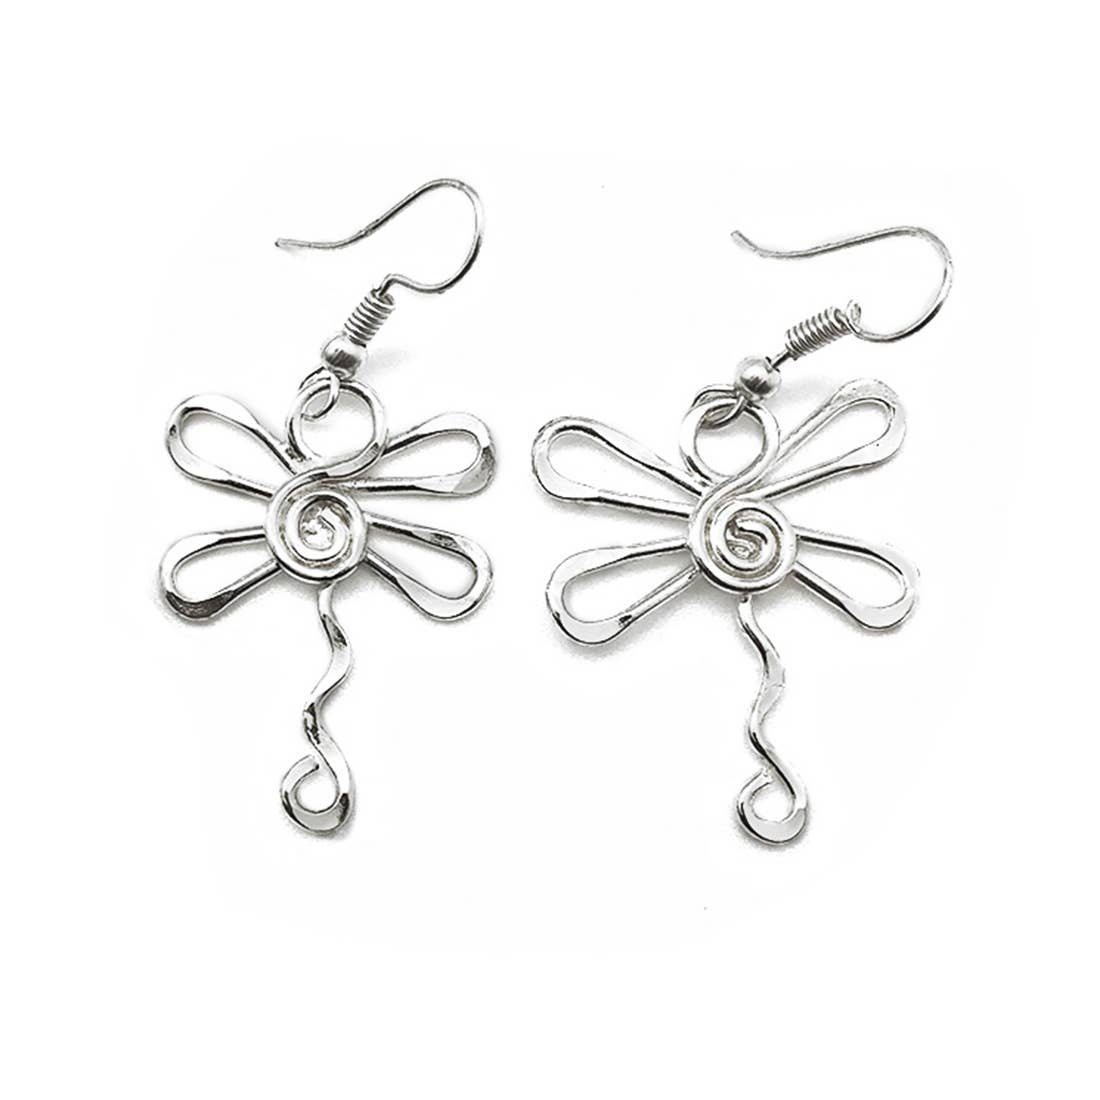 Silver Plated Earrings - Smaller Size Dragonfly